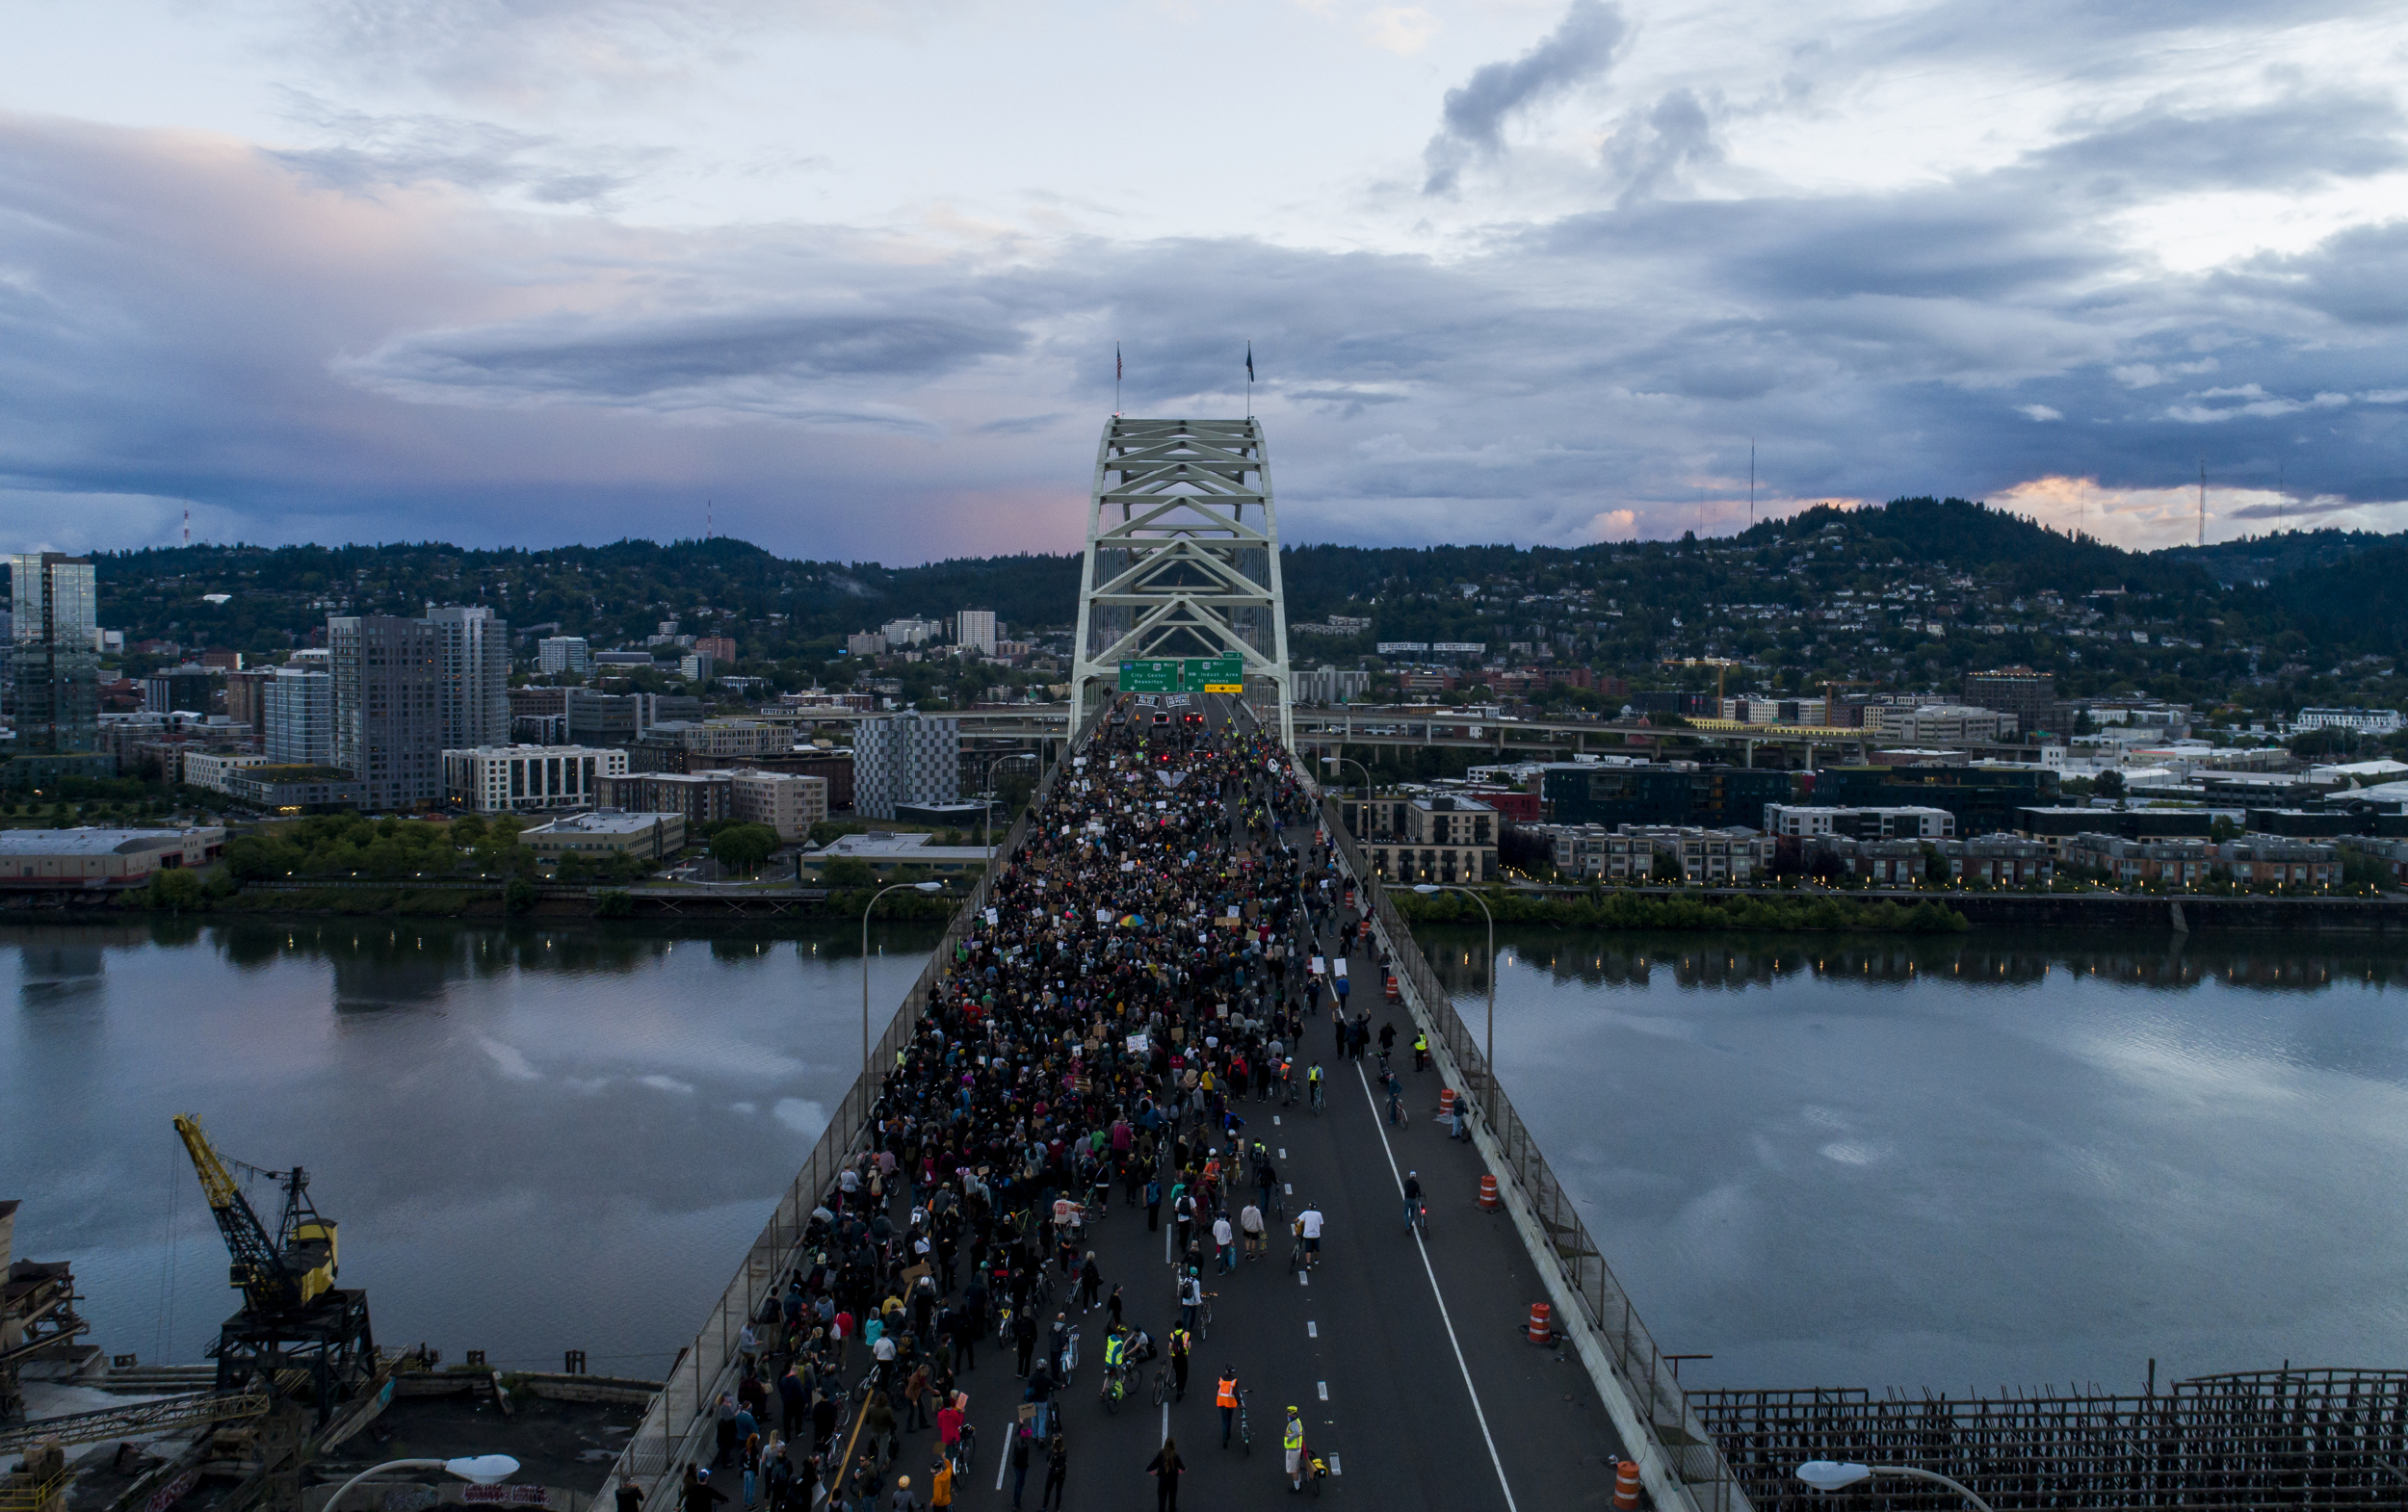 Protesters march onto the Fremont Bridge on June 16, 2020 to rally against police brutality. Dave Killen / Staff